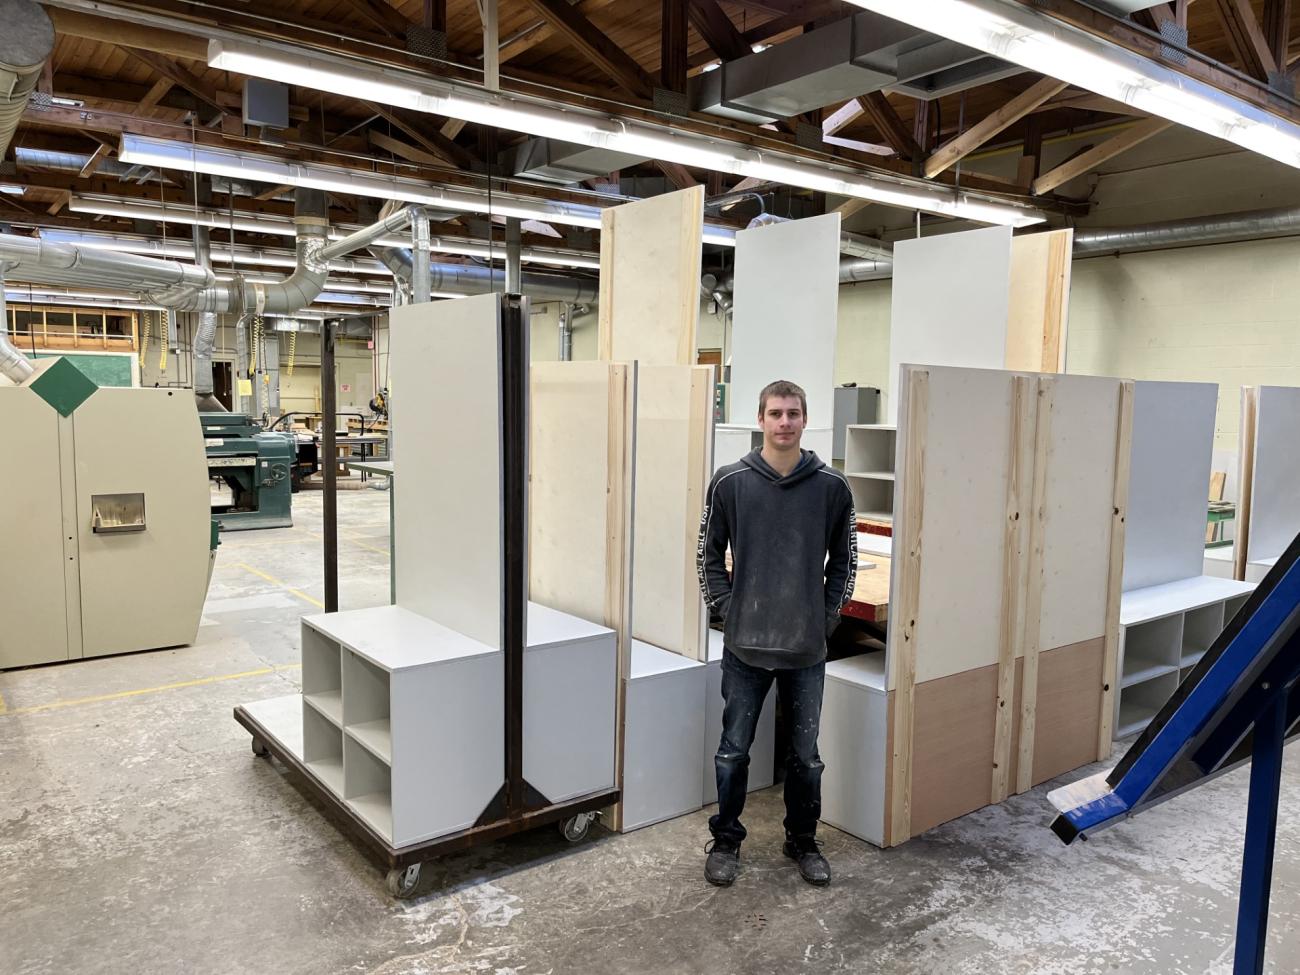 Secondary Wood Processing Class-Fall 2021: Student constructed moveable cabinets for Thermal Lab at ACET Center.